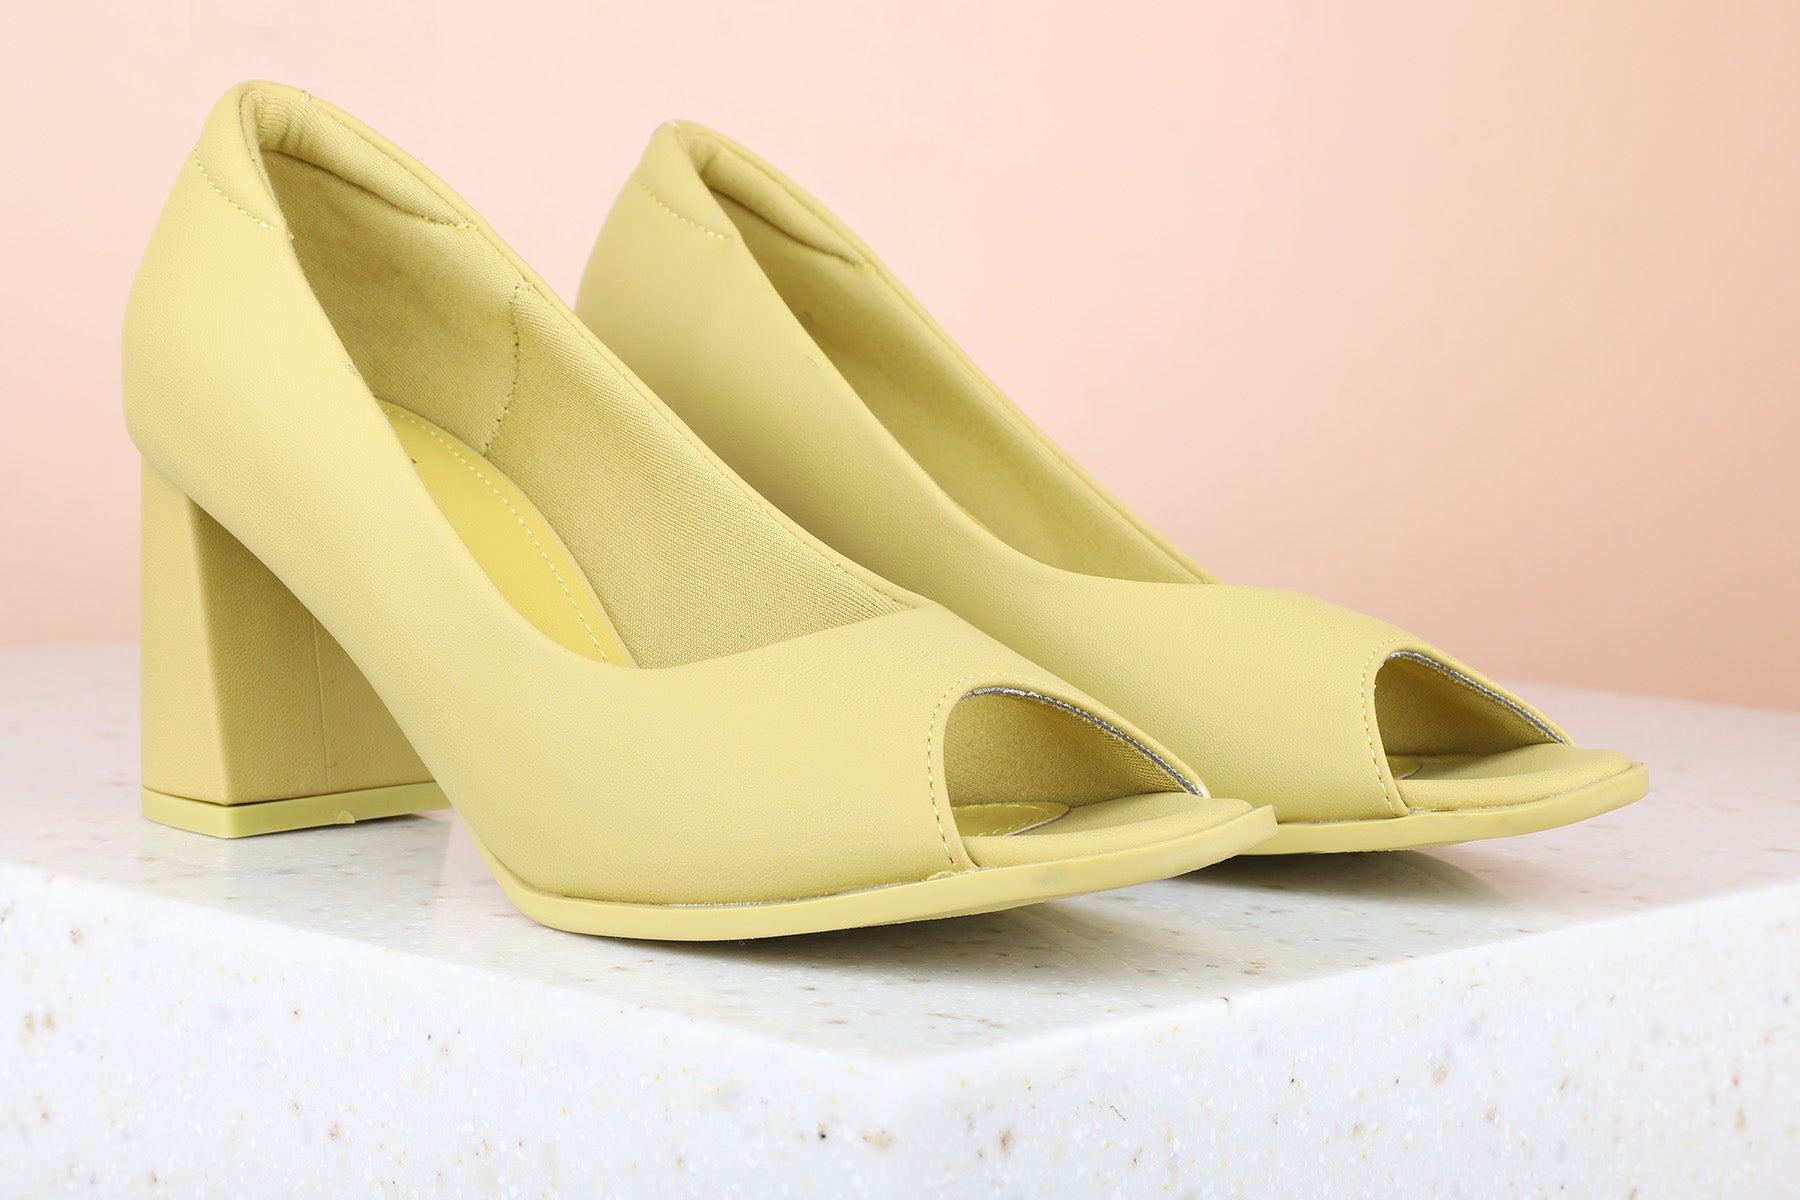 How to Wear Yellow Shoes - StyleCheer.com | Fashion shoes heels, Heels  outfits, Cute shoes heels